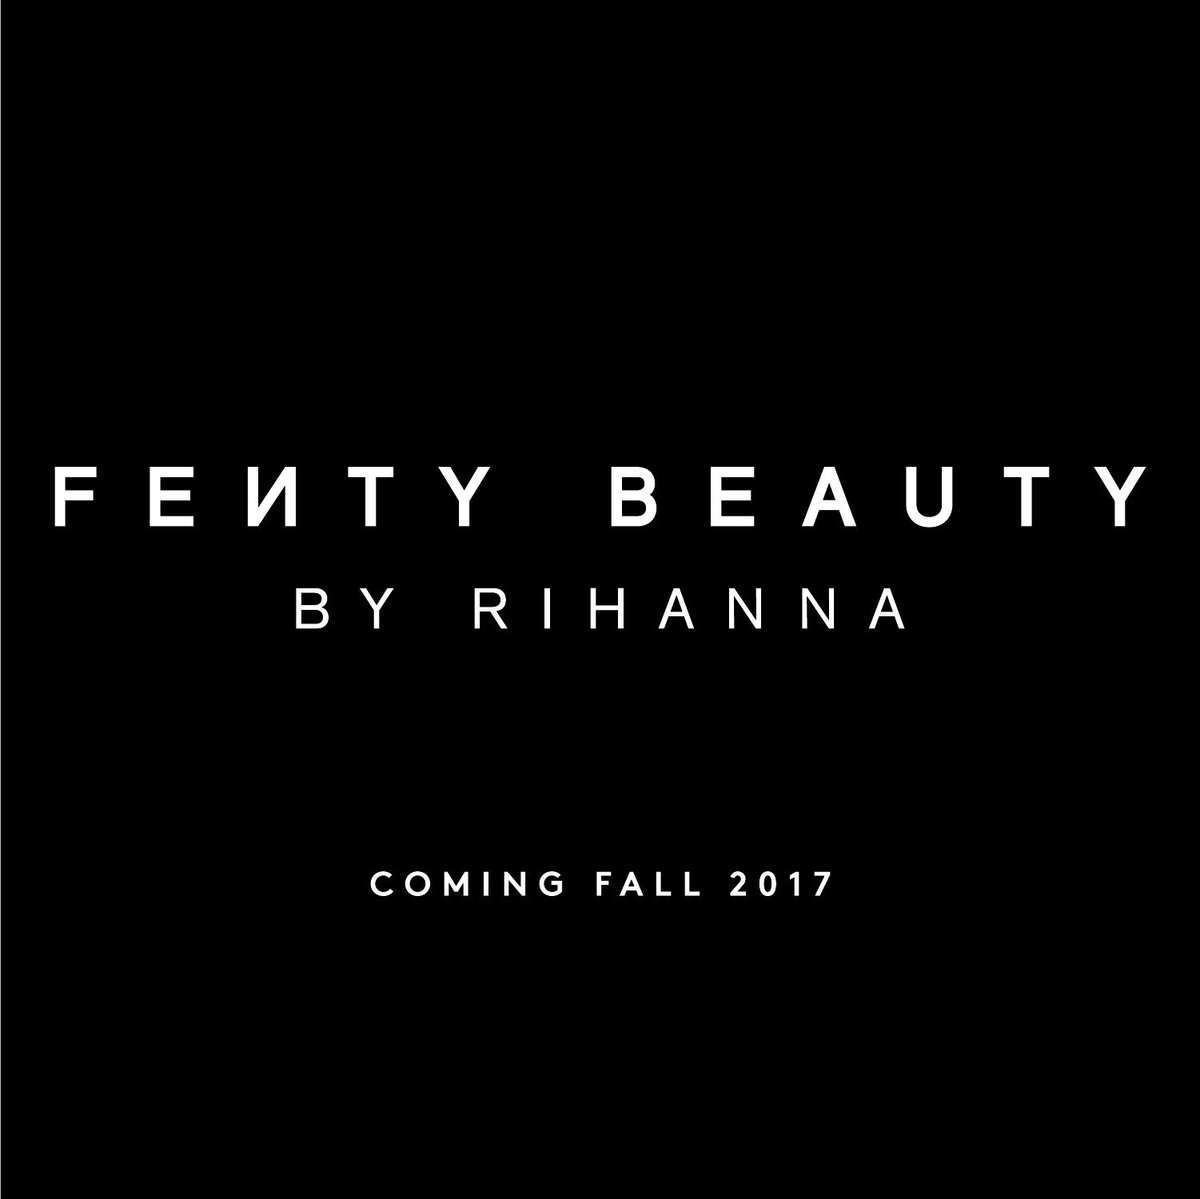 You ready? @fentybeauty   new generation of beauty...  coming this FALL! https://t.co/6wp8vdMHEh